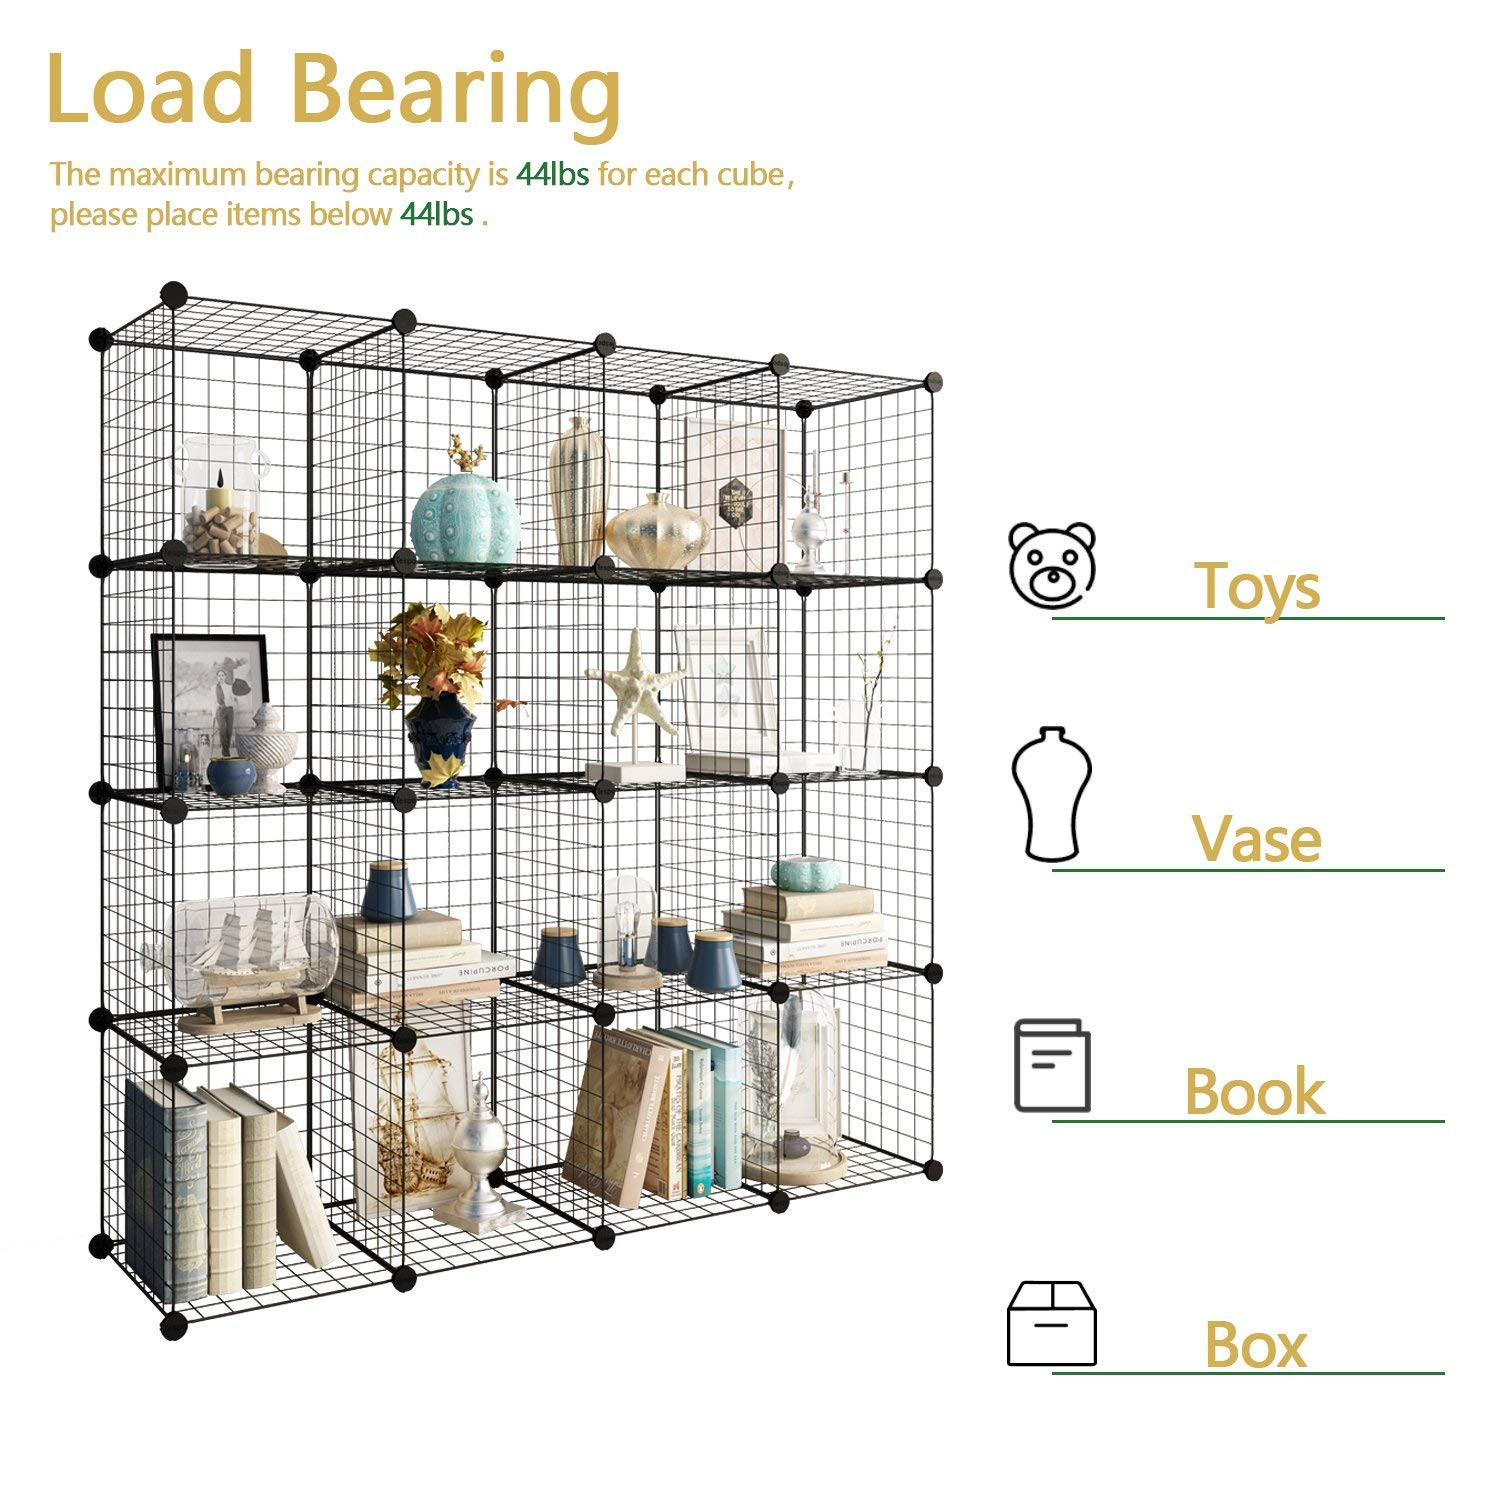 19 Fashionable 4 Inch Cube Vase 2022 free download 4 inch cube vase of amazon com tespo metal wire storage cubes modular shelving grids pertaining to amazon com tespo metal wire storage cubes modular shelving grids diy closet organization sy